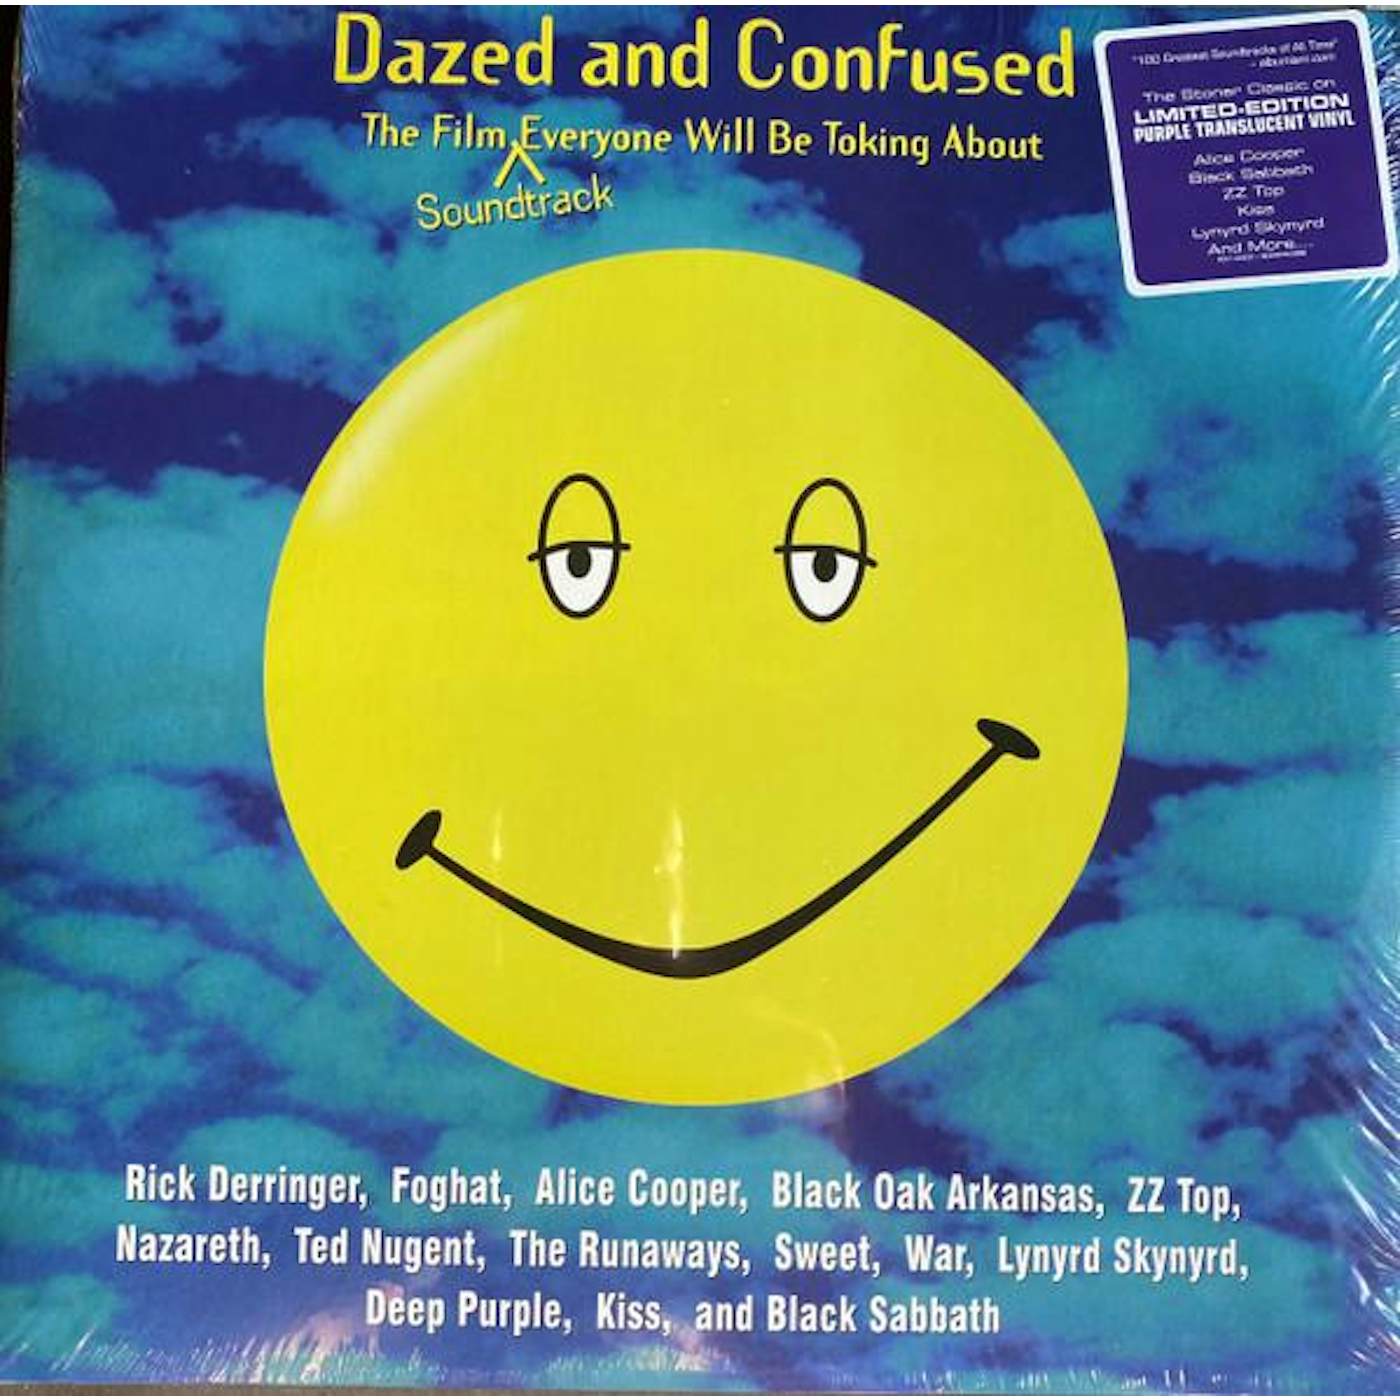 Various Artists DAZED & CONFUSED (MUSIC FROM THE MOTION PICTURE) (2LP/TRANSLUCENT PURPLE VINYL) (I) Vinyl Record